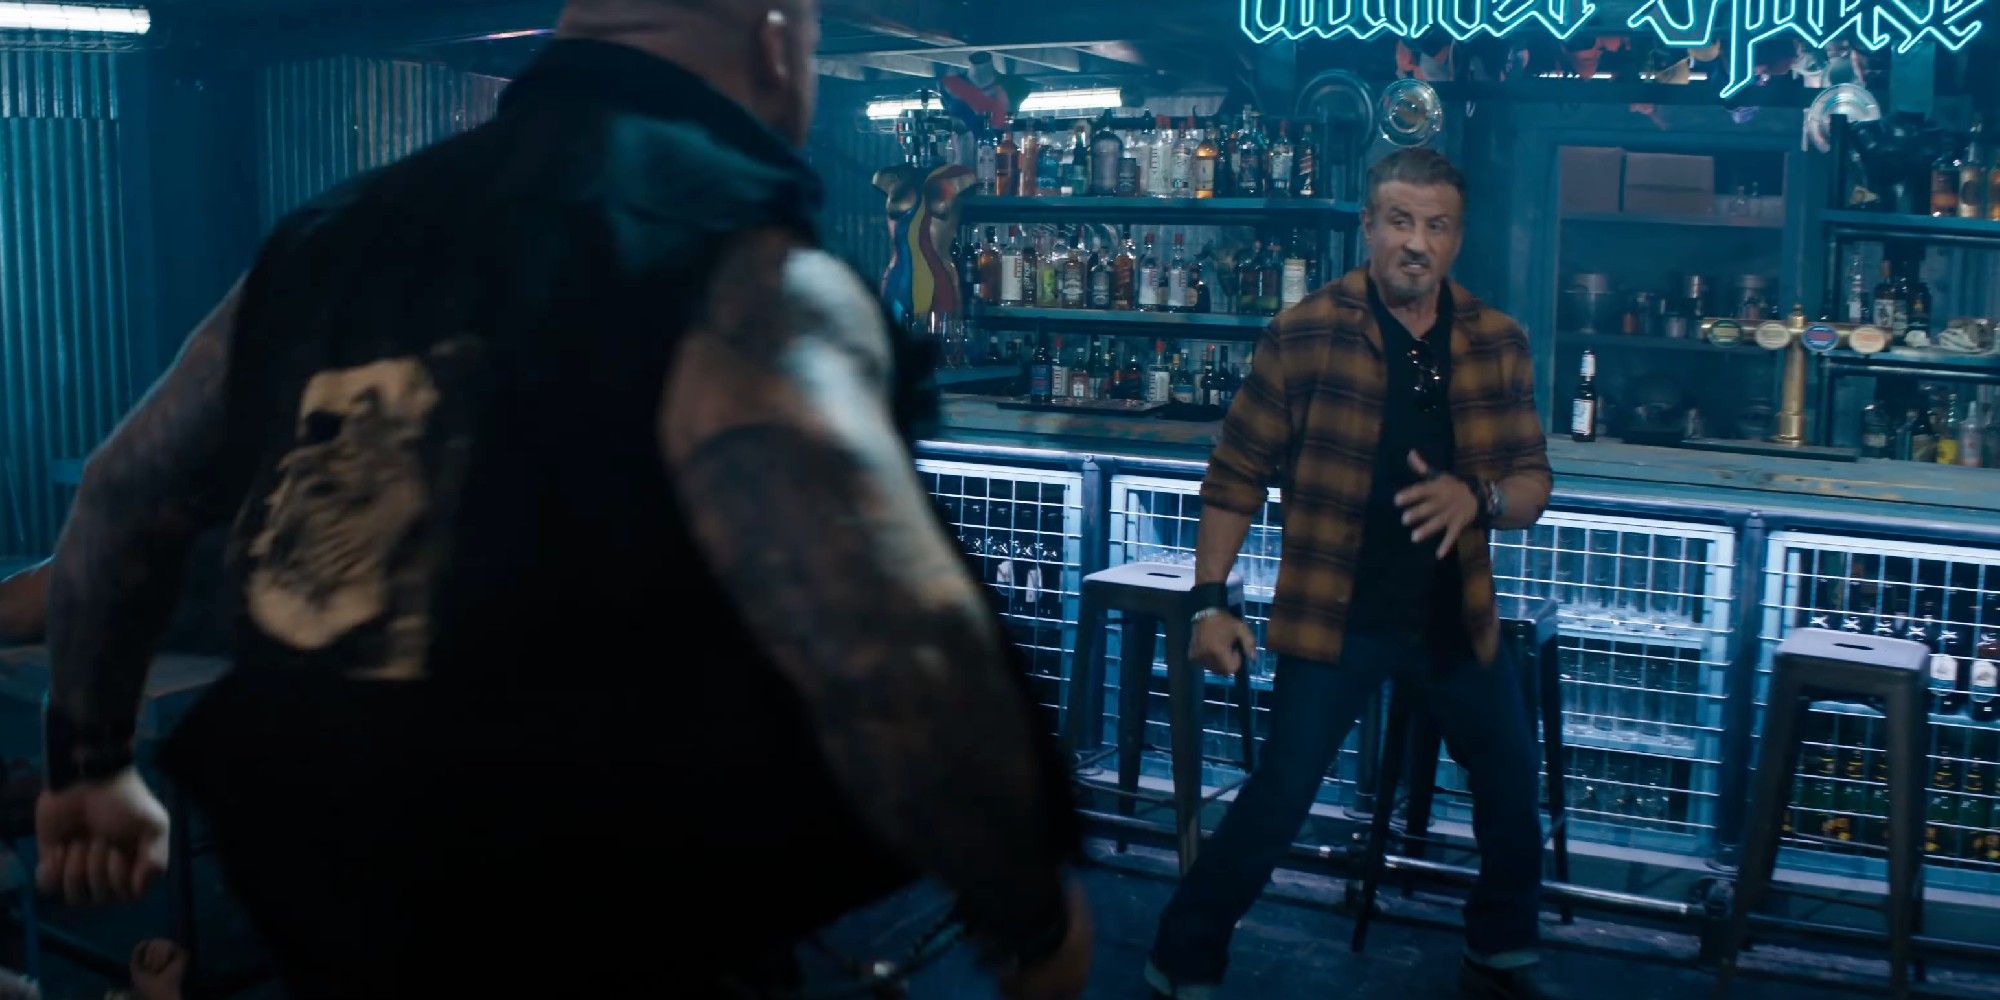 Sylvester Stallone preparing to fight in a bar in The Expendables 4